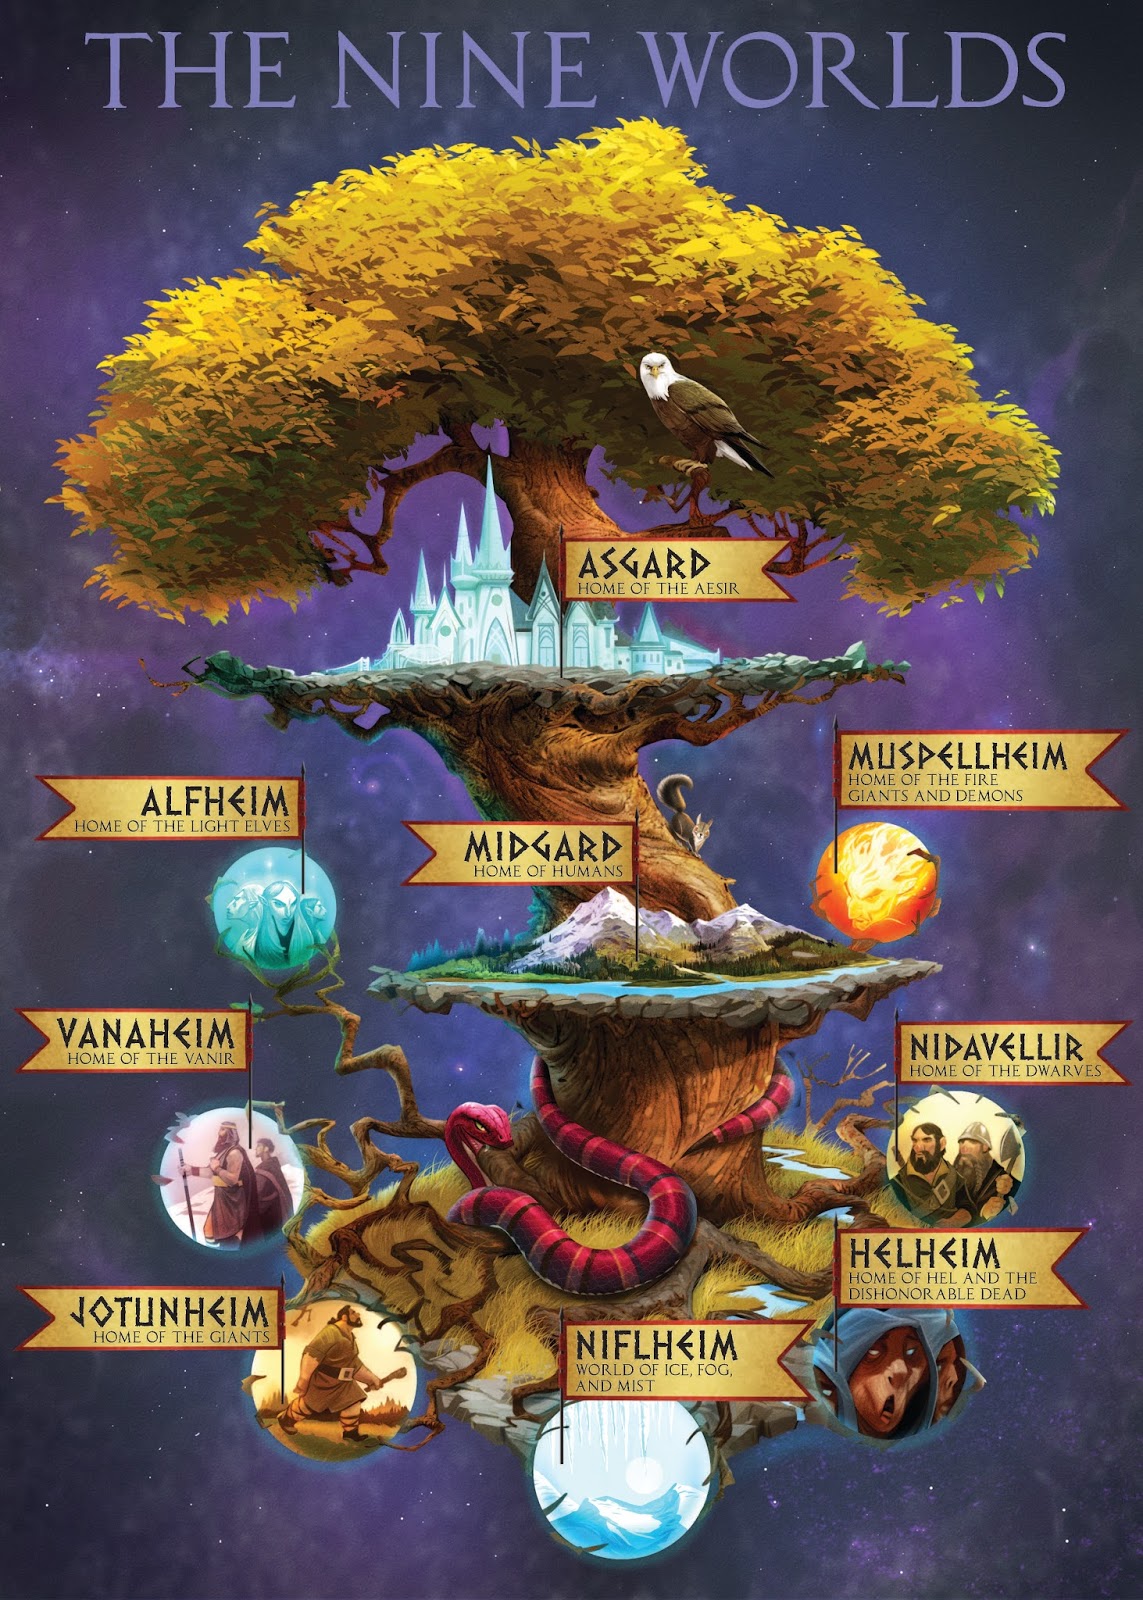 all 9 realms